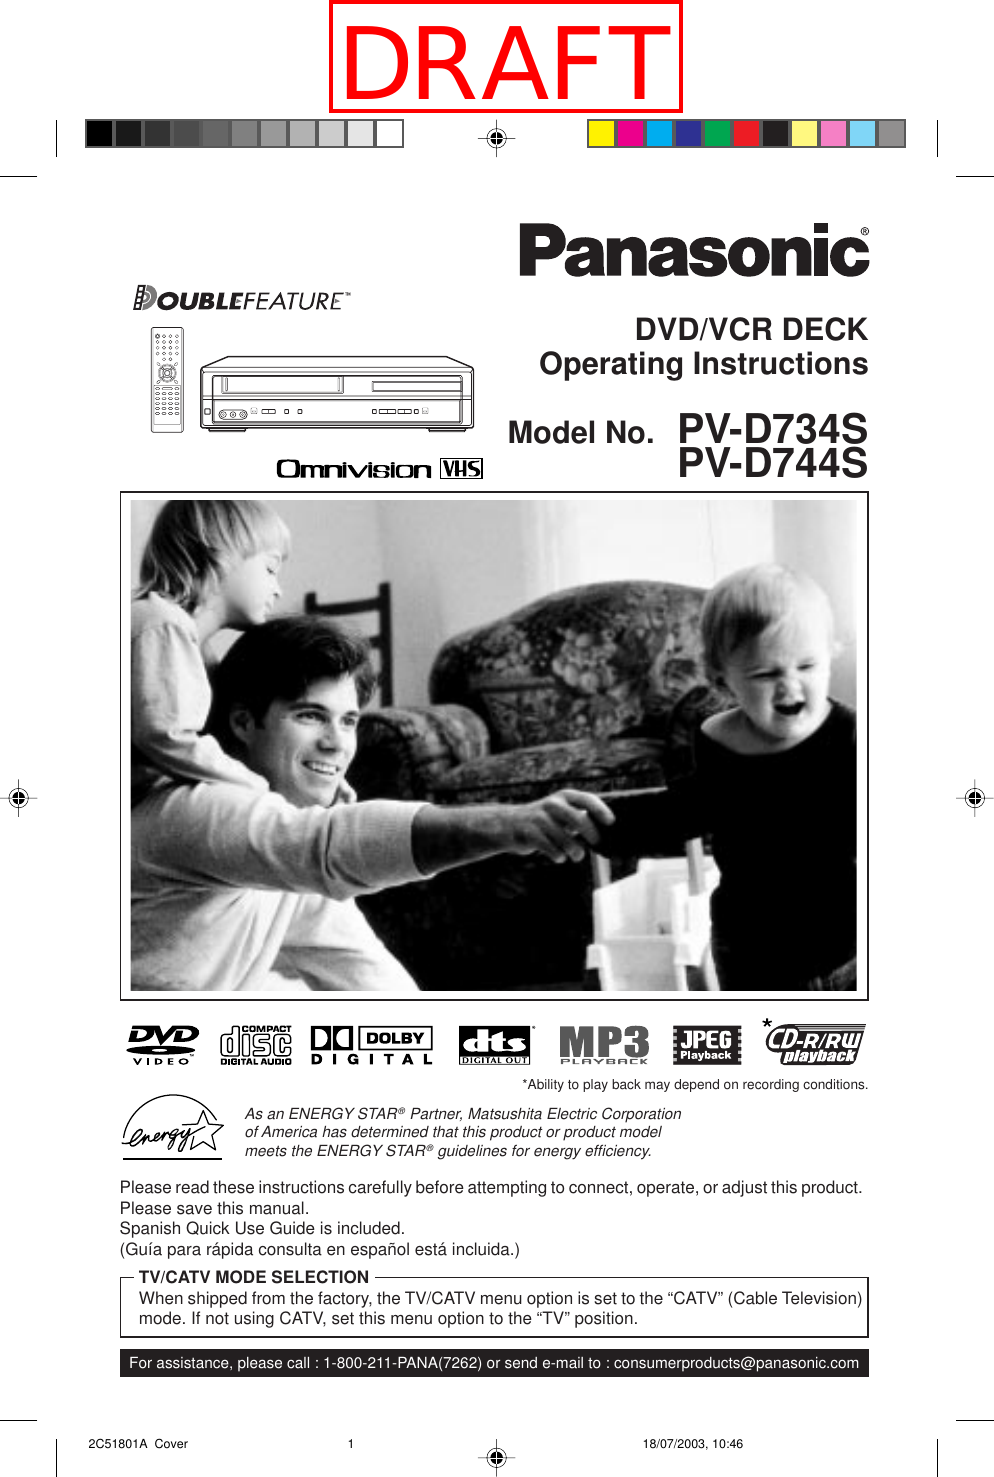 DVD/VCR DECKOperating InstructionsModel No.  PV-D734SPV-D744SFor assistance, please call : 1-800-211-PANA(7262) or send e-mail to : consumerproducts@panasonic.comPlease read these instructions carefully before attempting to connect, operate, or adjust this product.Please save this manual.Spanish Quick Use Guide is included.(Guía para rápida consulta en español está incluida.)TV/CATV MODE SELECTIONWhen shipped from the factory, the TV/CATV menu option is set to the “CATV” (Cable Television)mode. If not using CATV, set this menu option to the “TV” position.As an ENERGY STAR® Partner, Matsushita Electric Corporationof America has determined that this product or product modelmeets the ENERGY STAR® guidelines for energy efﬁciency.*Ability to play back may depend on recording conditions. 2C51801A  Cover 18/07/2003, 10:461DRAFT